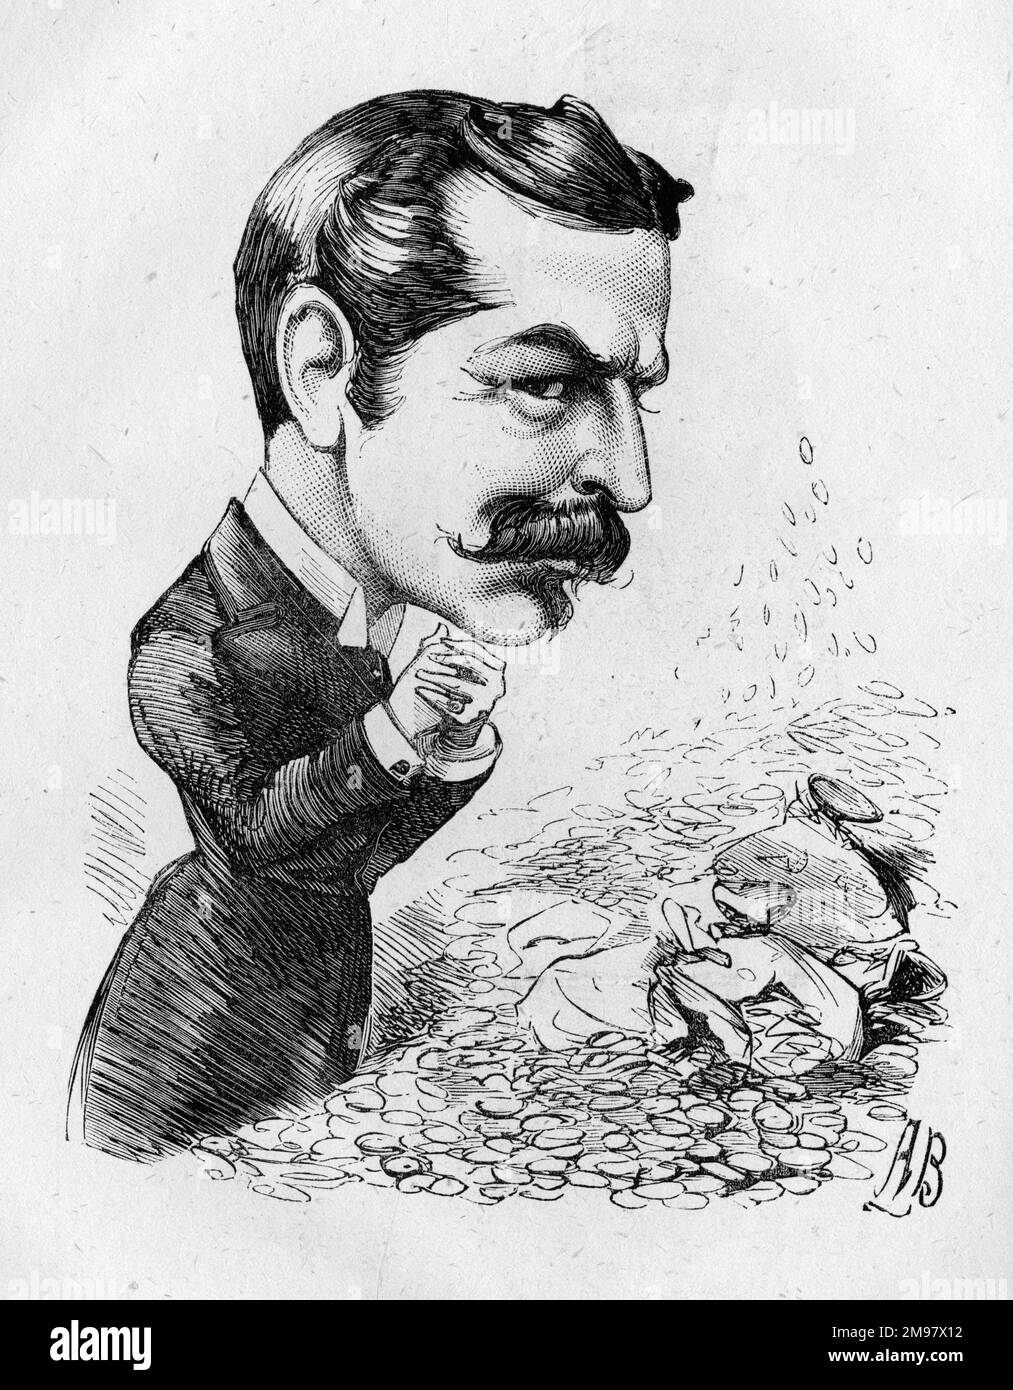 Cartoon of William Lehman Ashmead Bartlett Burdett-Coutts (1851-1921) -- The Money-Spinner.  He was an American-born British Conservative politician. He married the philanthropist, Baroness Burdett-Coutts, in February 1881 and took her surname (he had previously worked as her secretary). Stock Photo